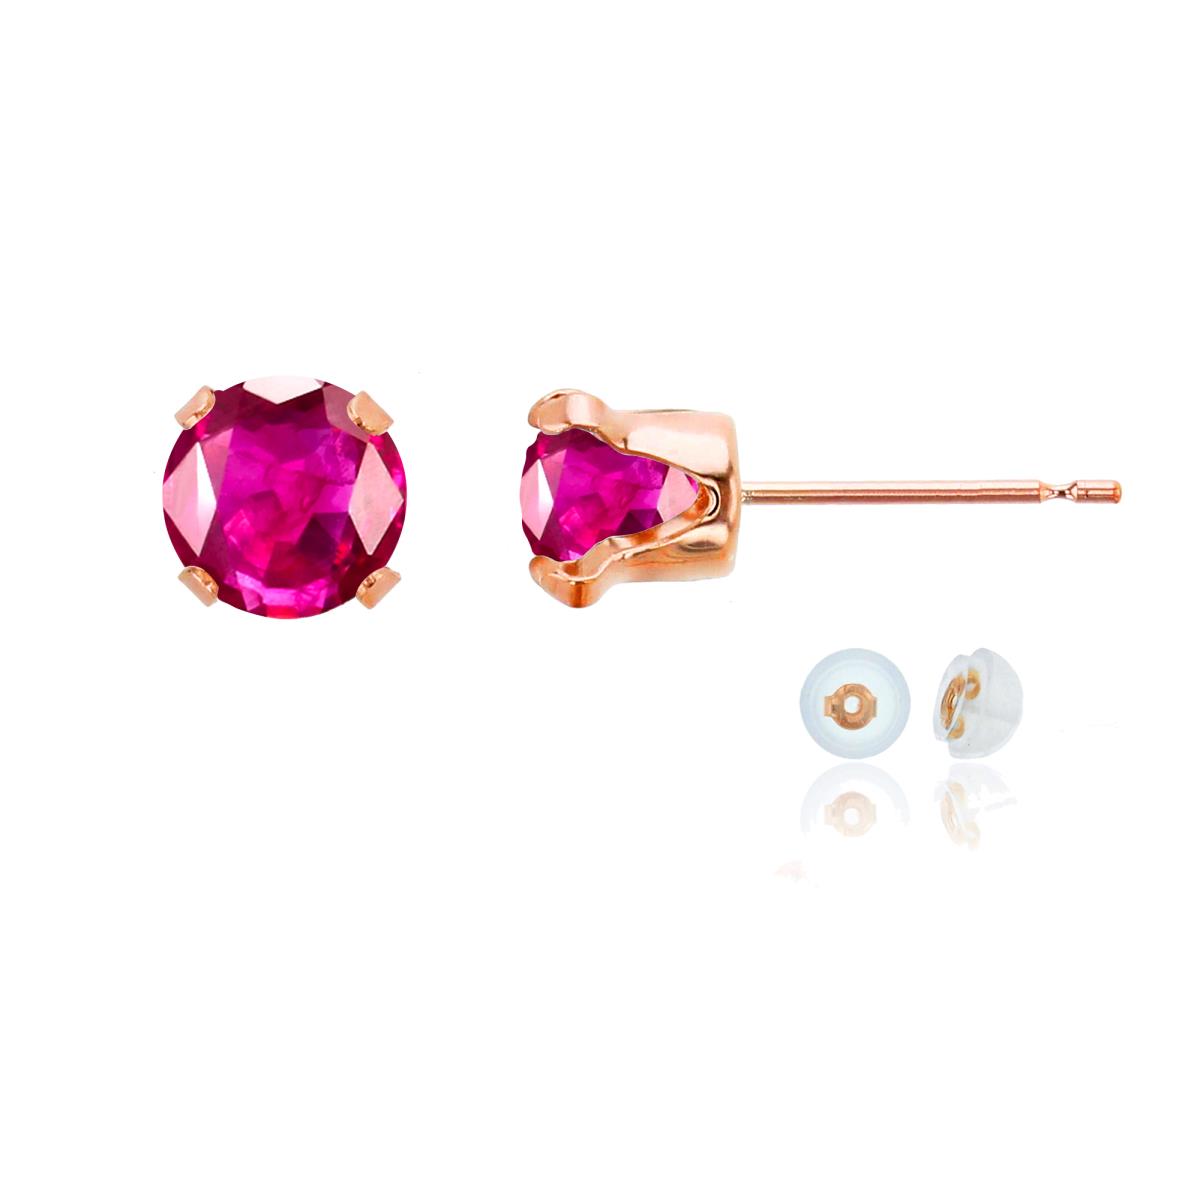 10K Rose Gold 6mm Round Glass Filled Ruby Stud Earring with Silicone Back